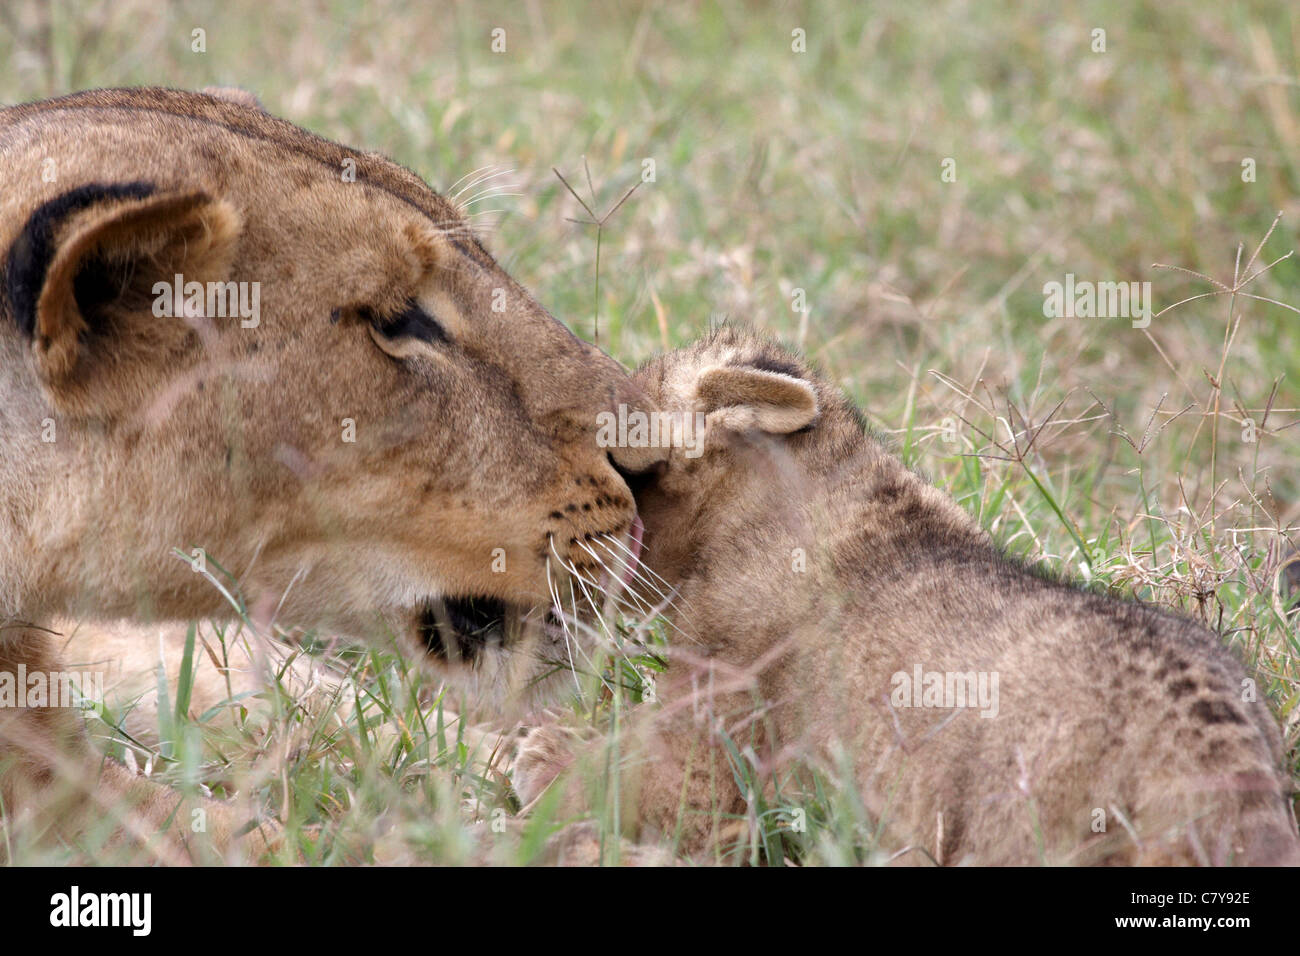 Lion mother caring for lion baby cub (Panthera leo) Stock Photo